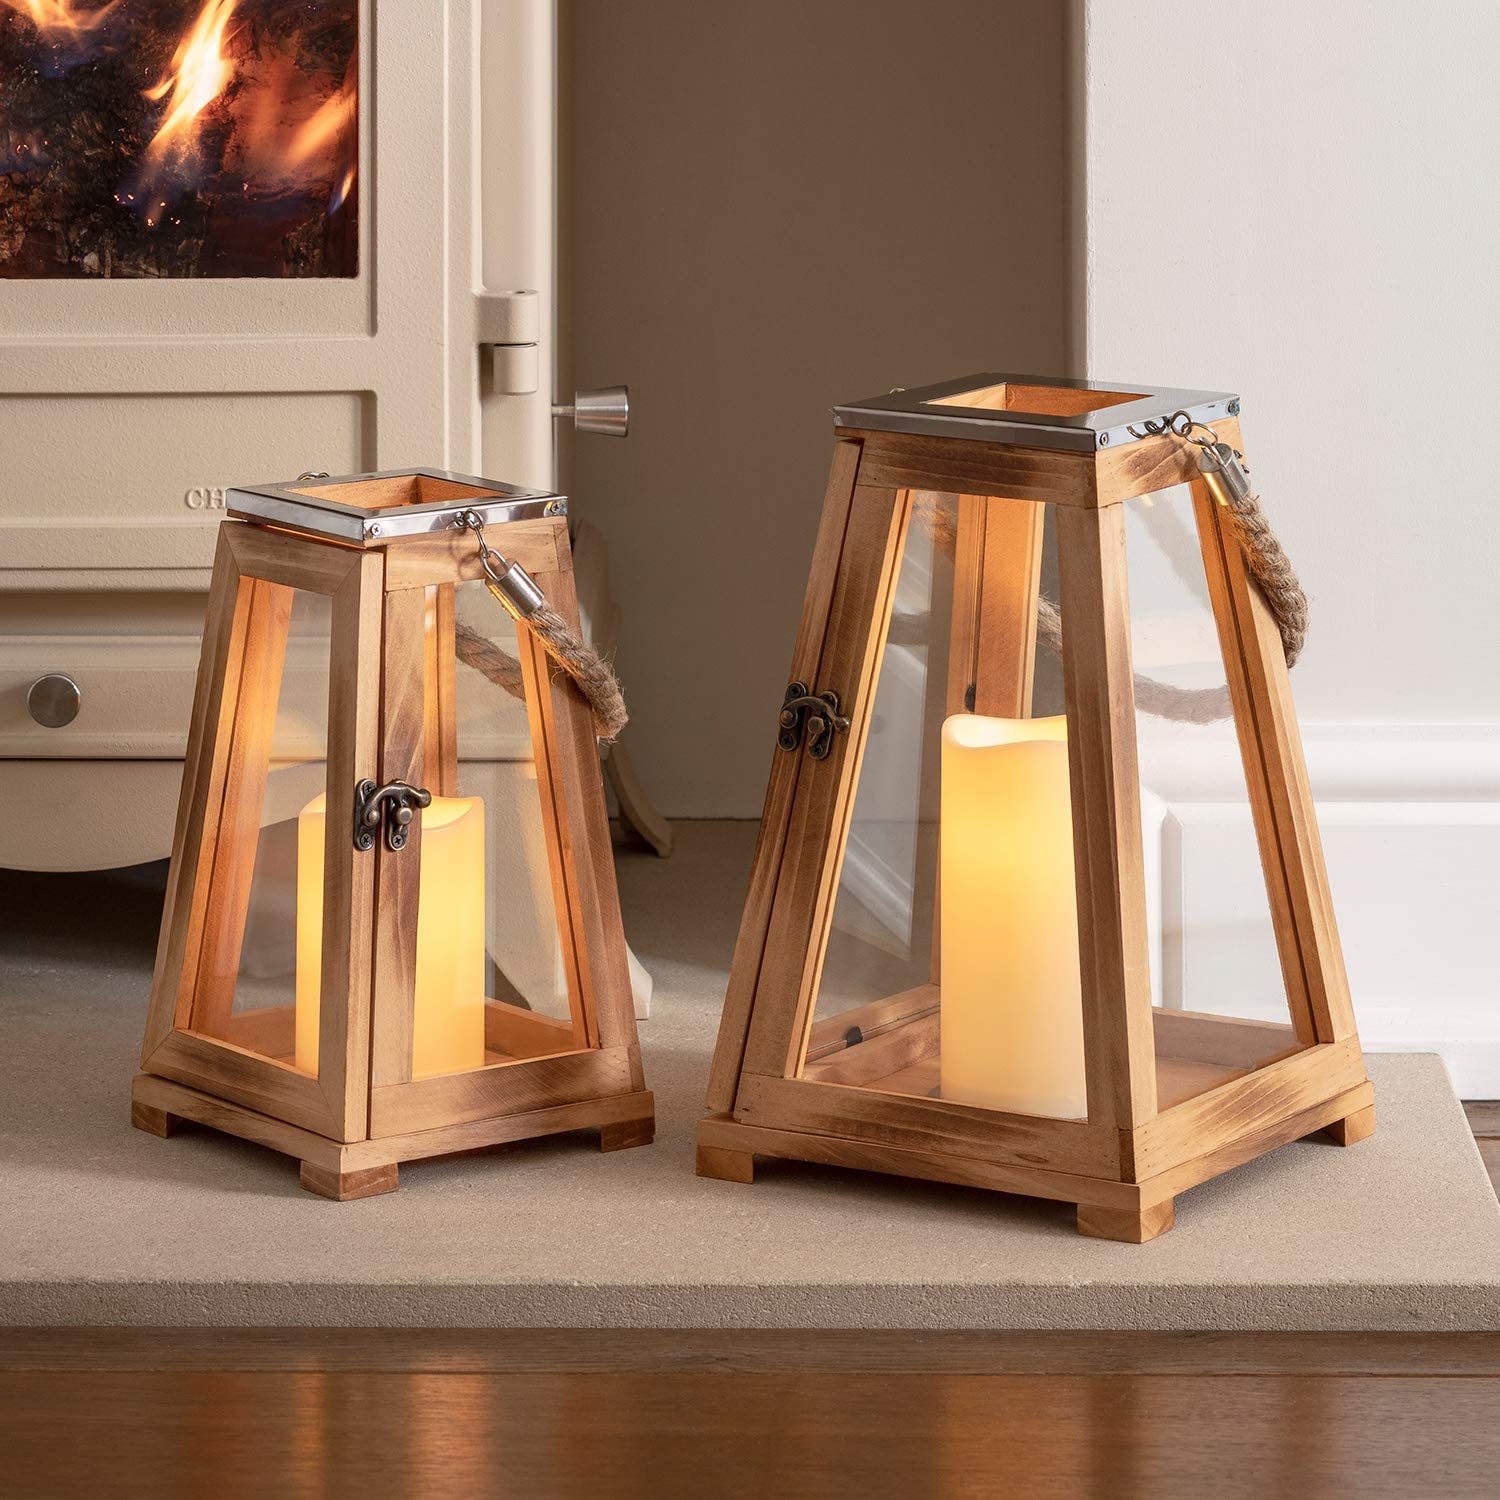 wooden candle holders with glass and electronic candles